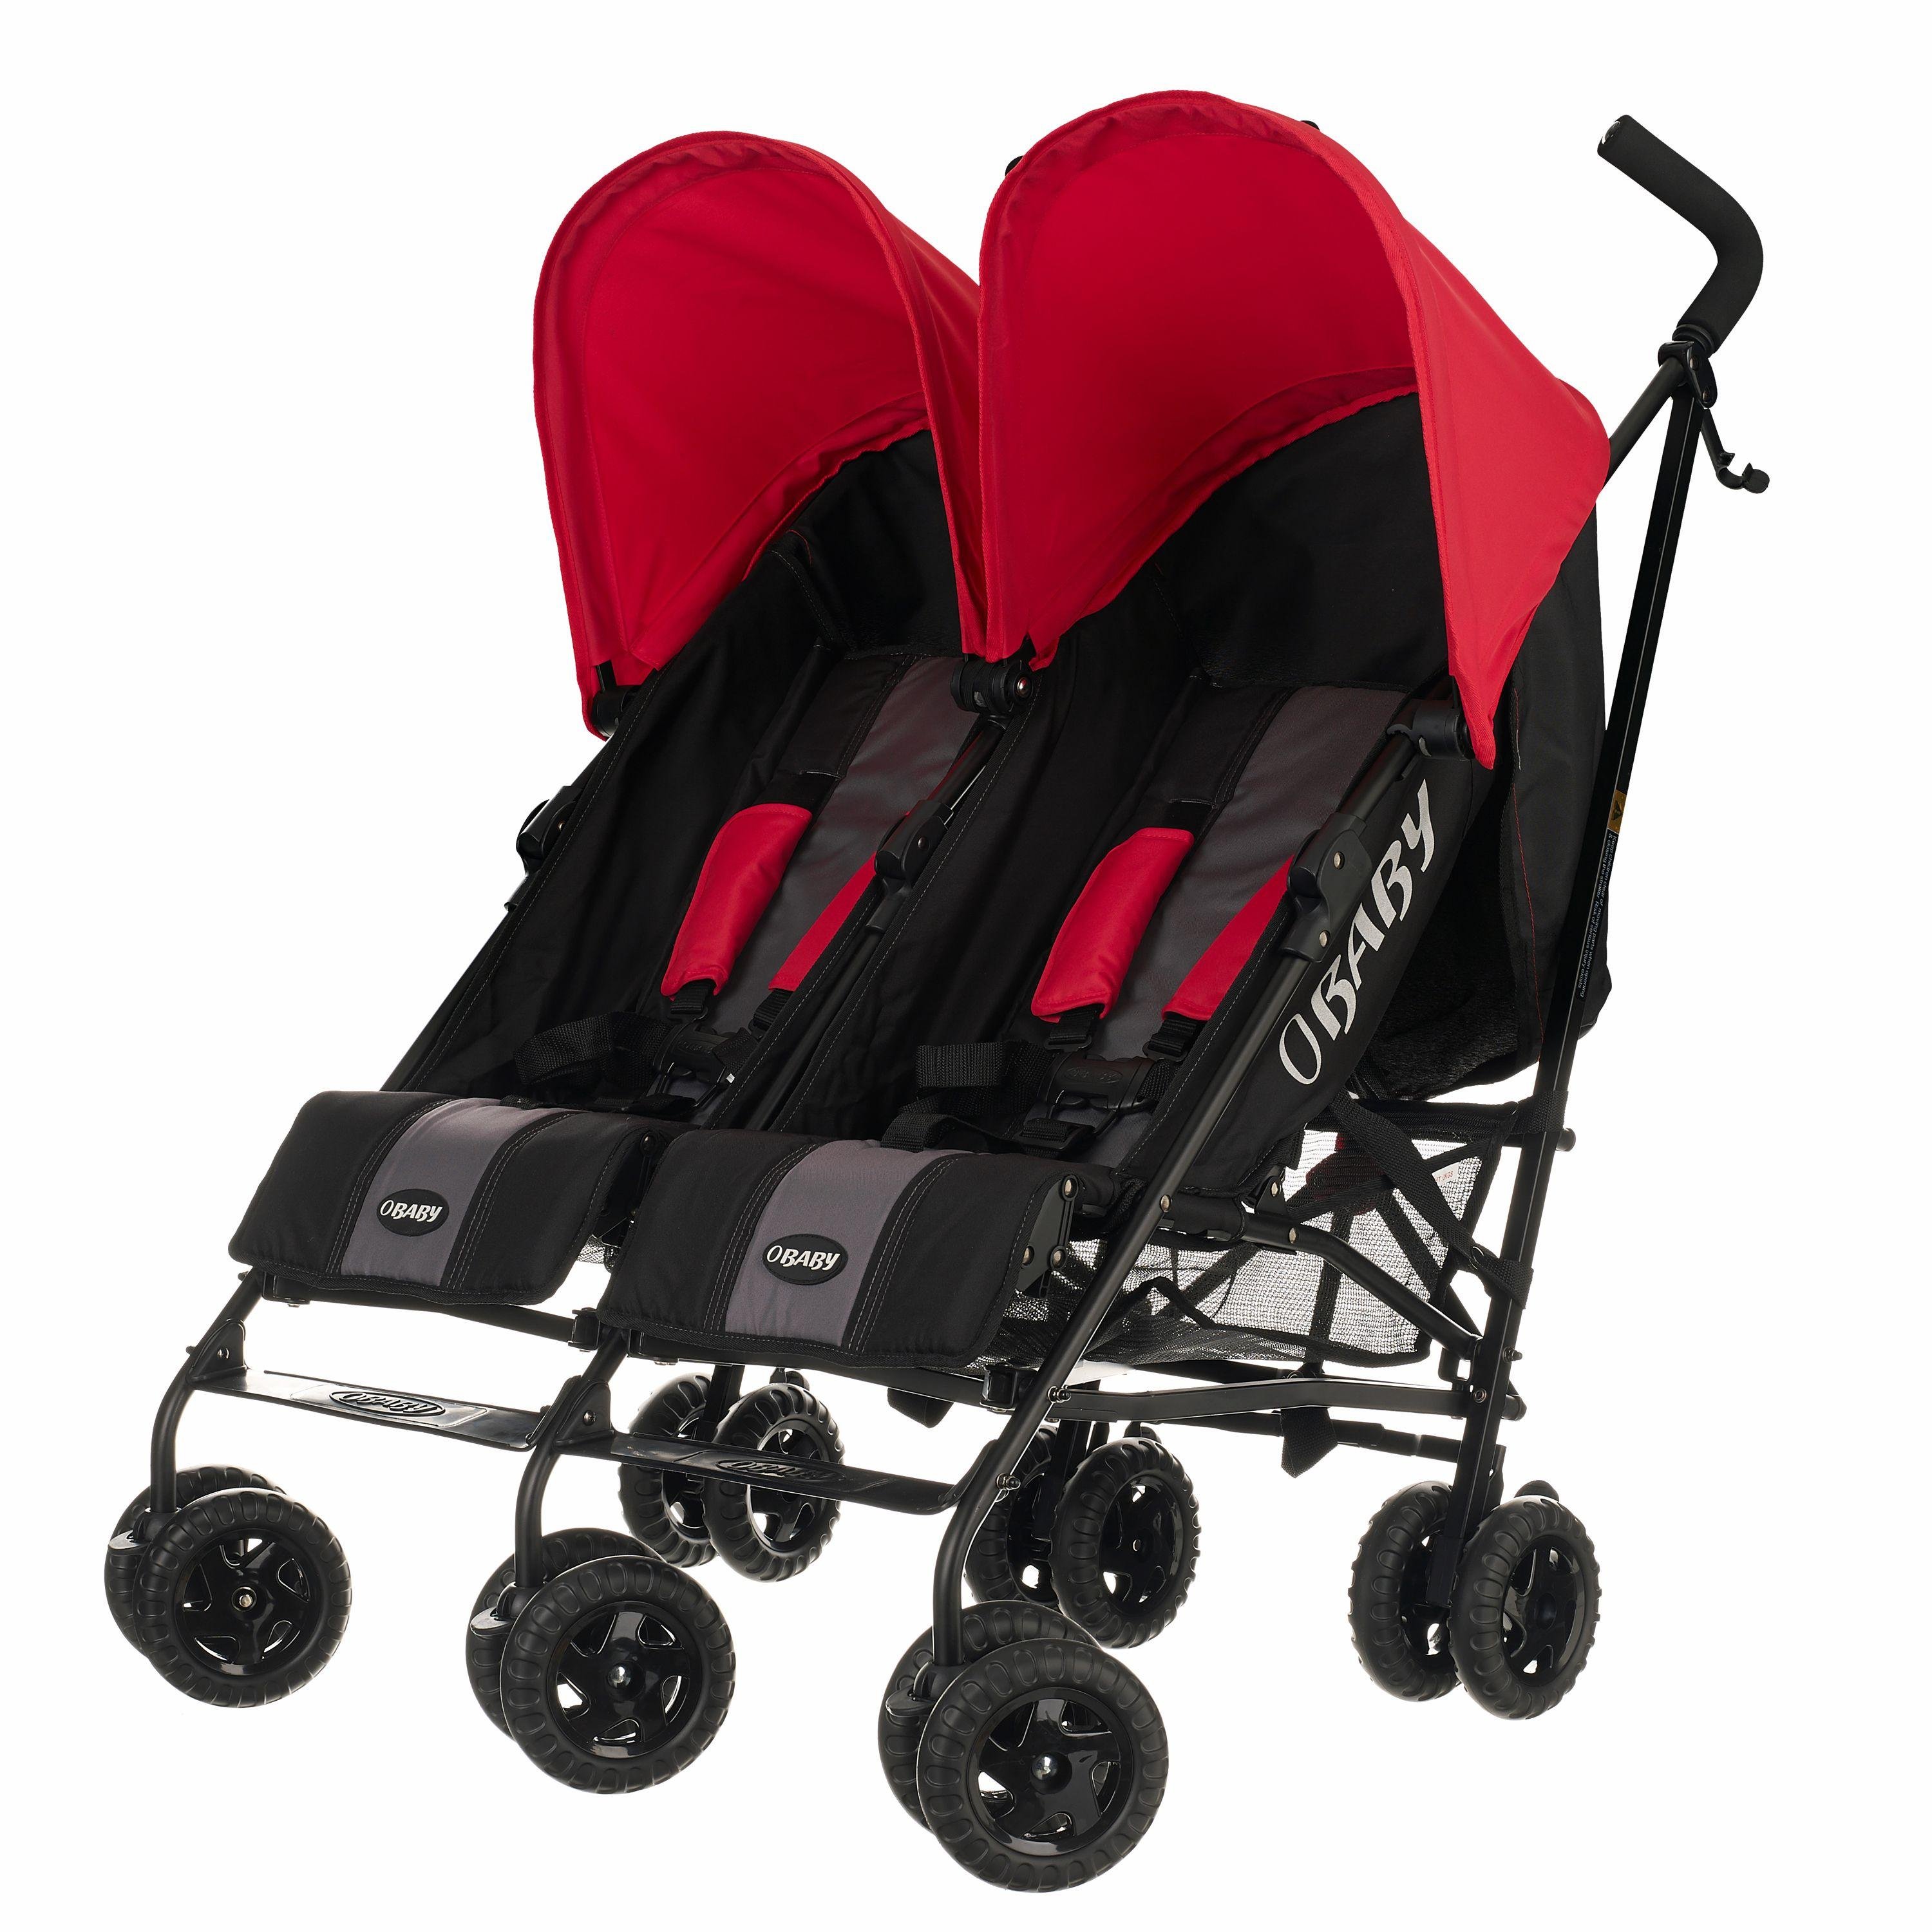 Obaby Apollo Black and Grey Double Pushchair - Red